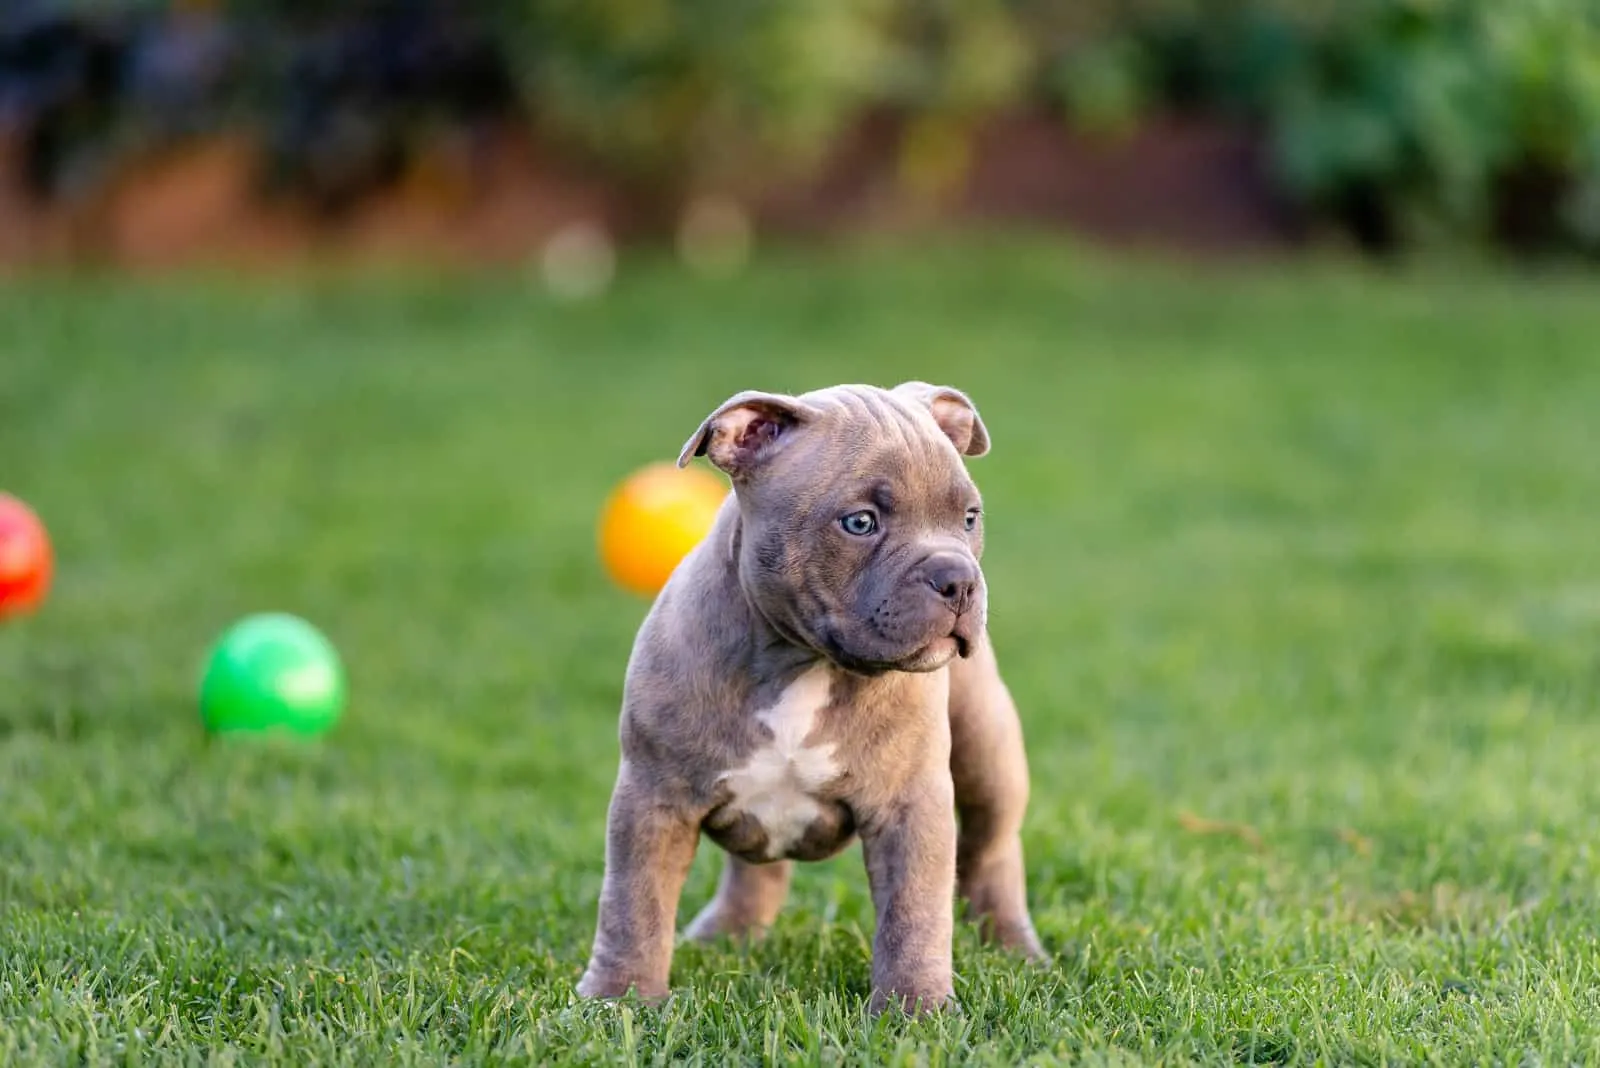 American Bully puppy stands on the grass and looks around